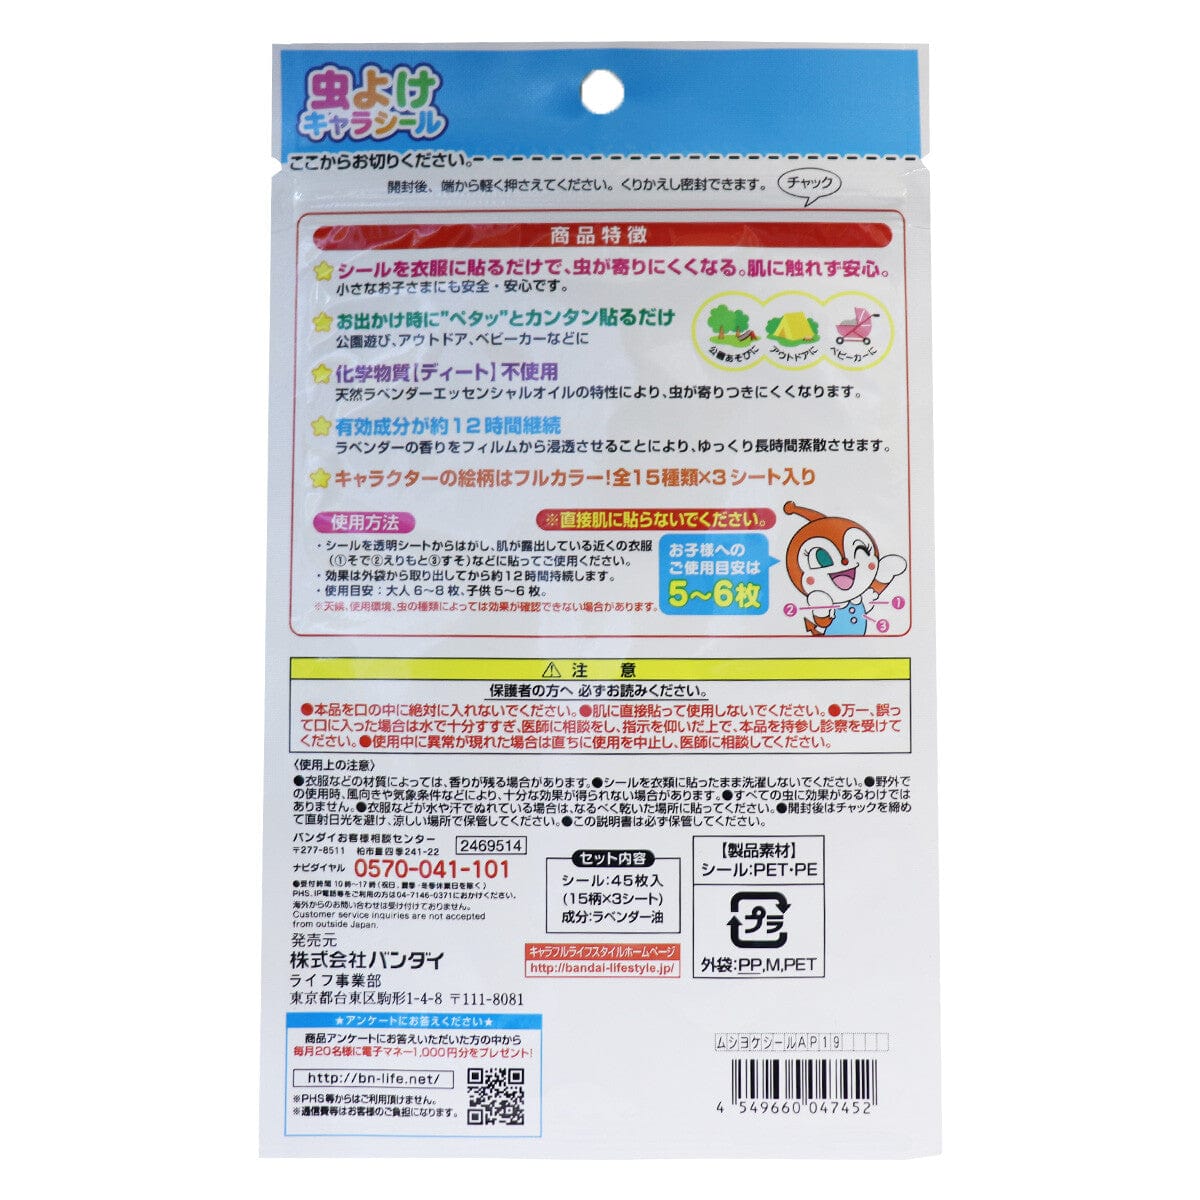 Bandai - Insect Repellent Seal Sticker Mosquito Patch (45 Pieces) -  Insect Repellent Patch  Durio.sg